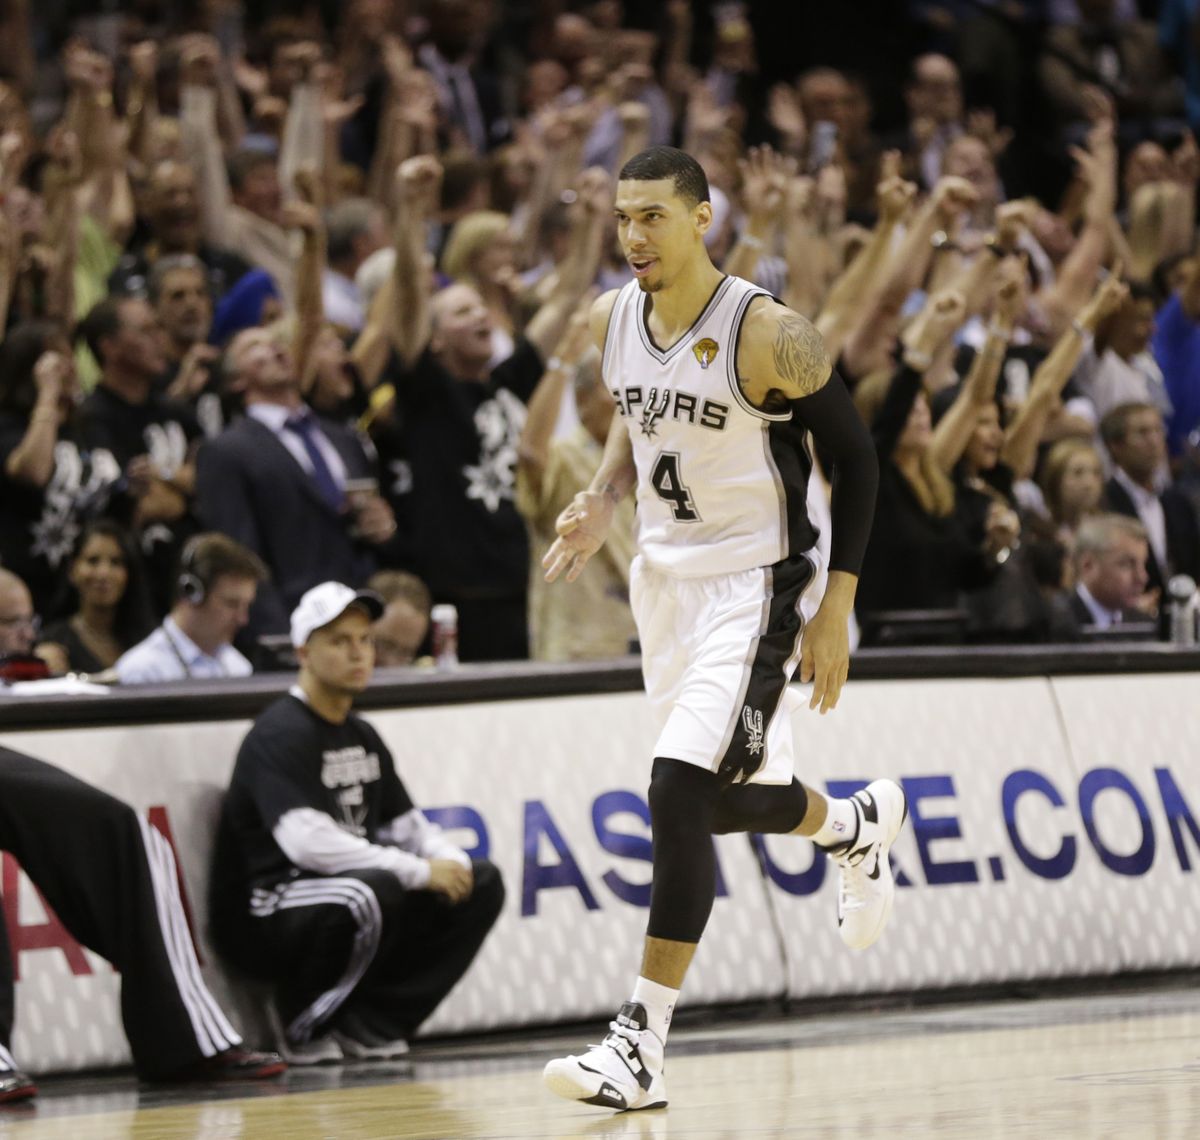 Danny Green hit seven of the Spurs’ record 16 3-pointers. (Associated Press)